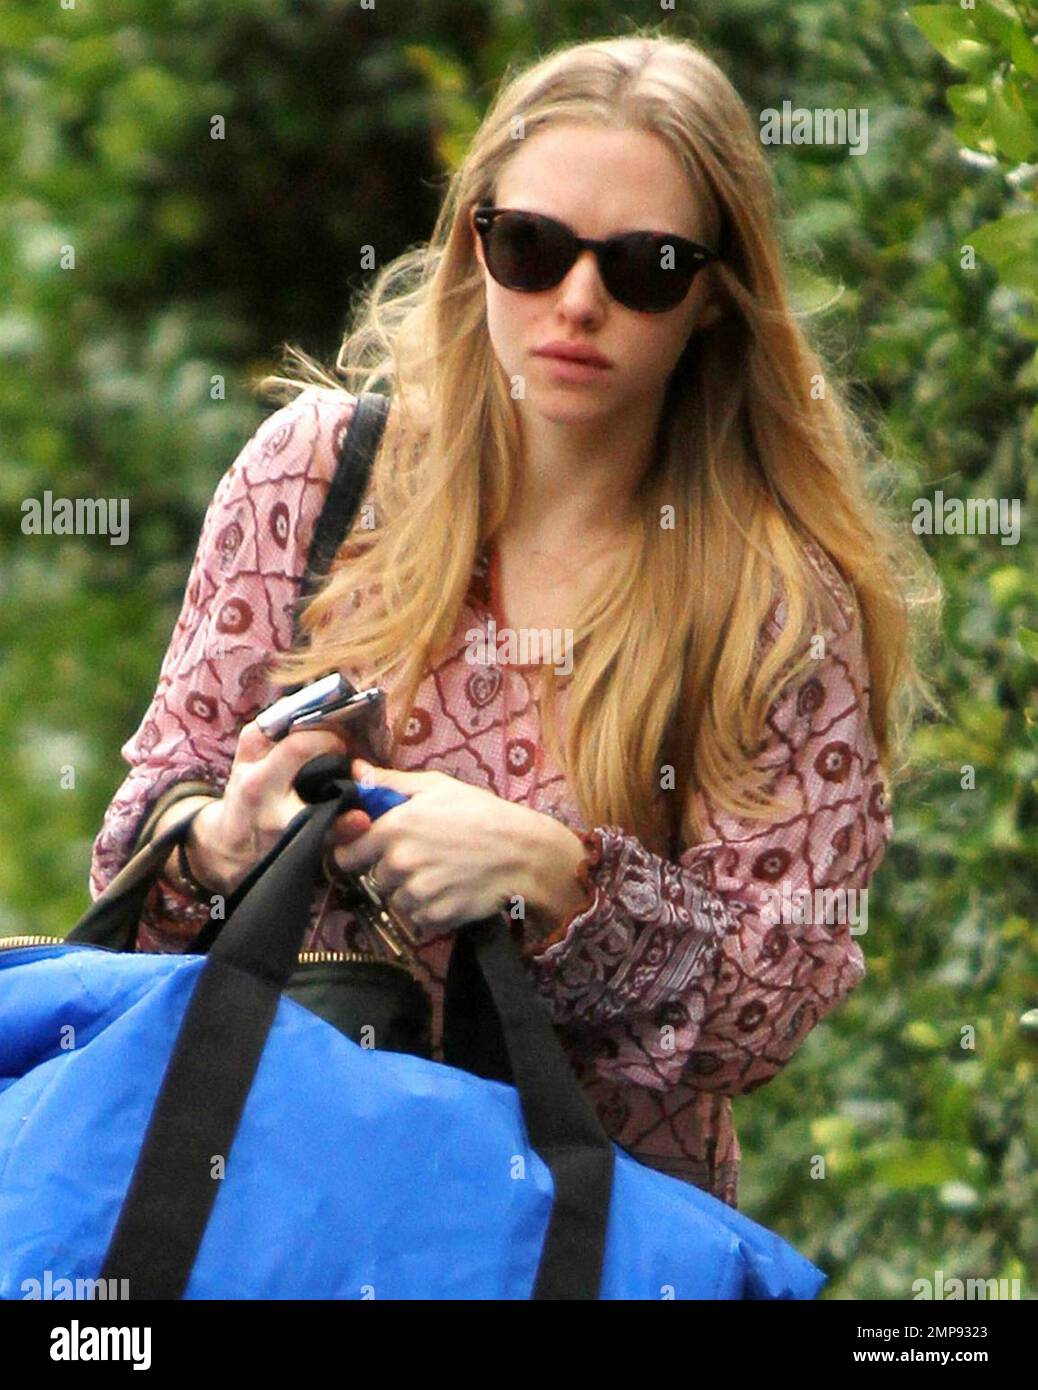 EXCLUSIVE!! In a pair of black combat boots that she's been seen wearing  around lately, tight black jeans and a flouncy top actress Amanda Seyfried,  25, appears a bit glum as she